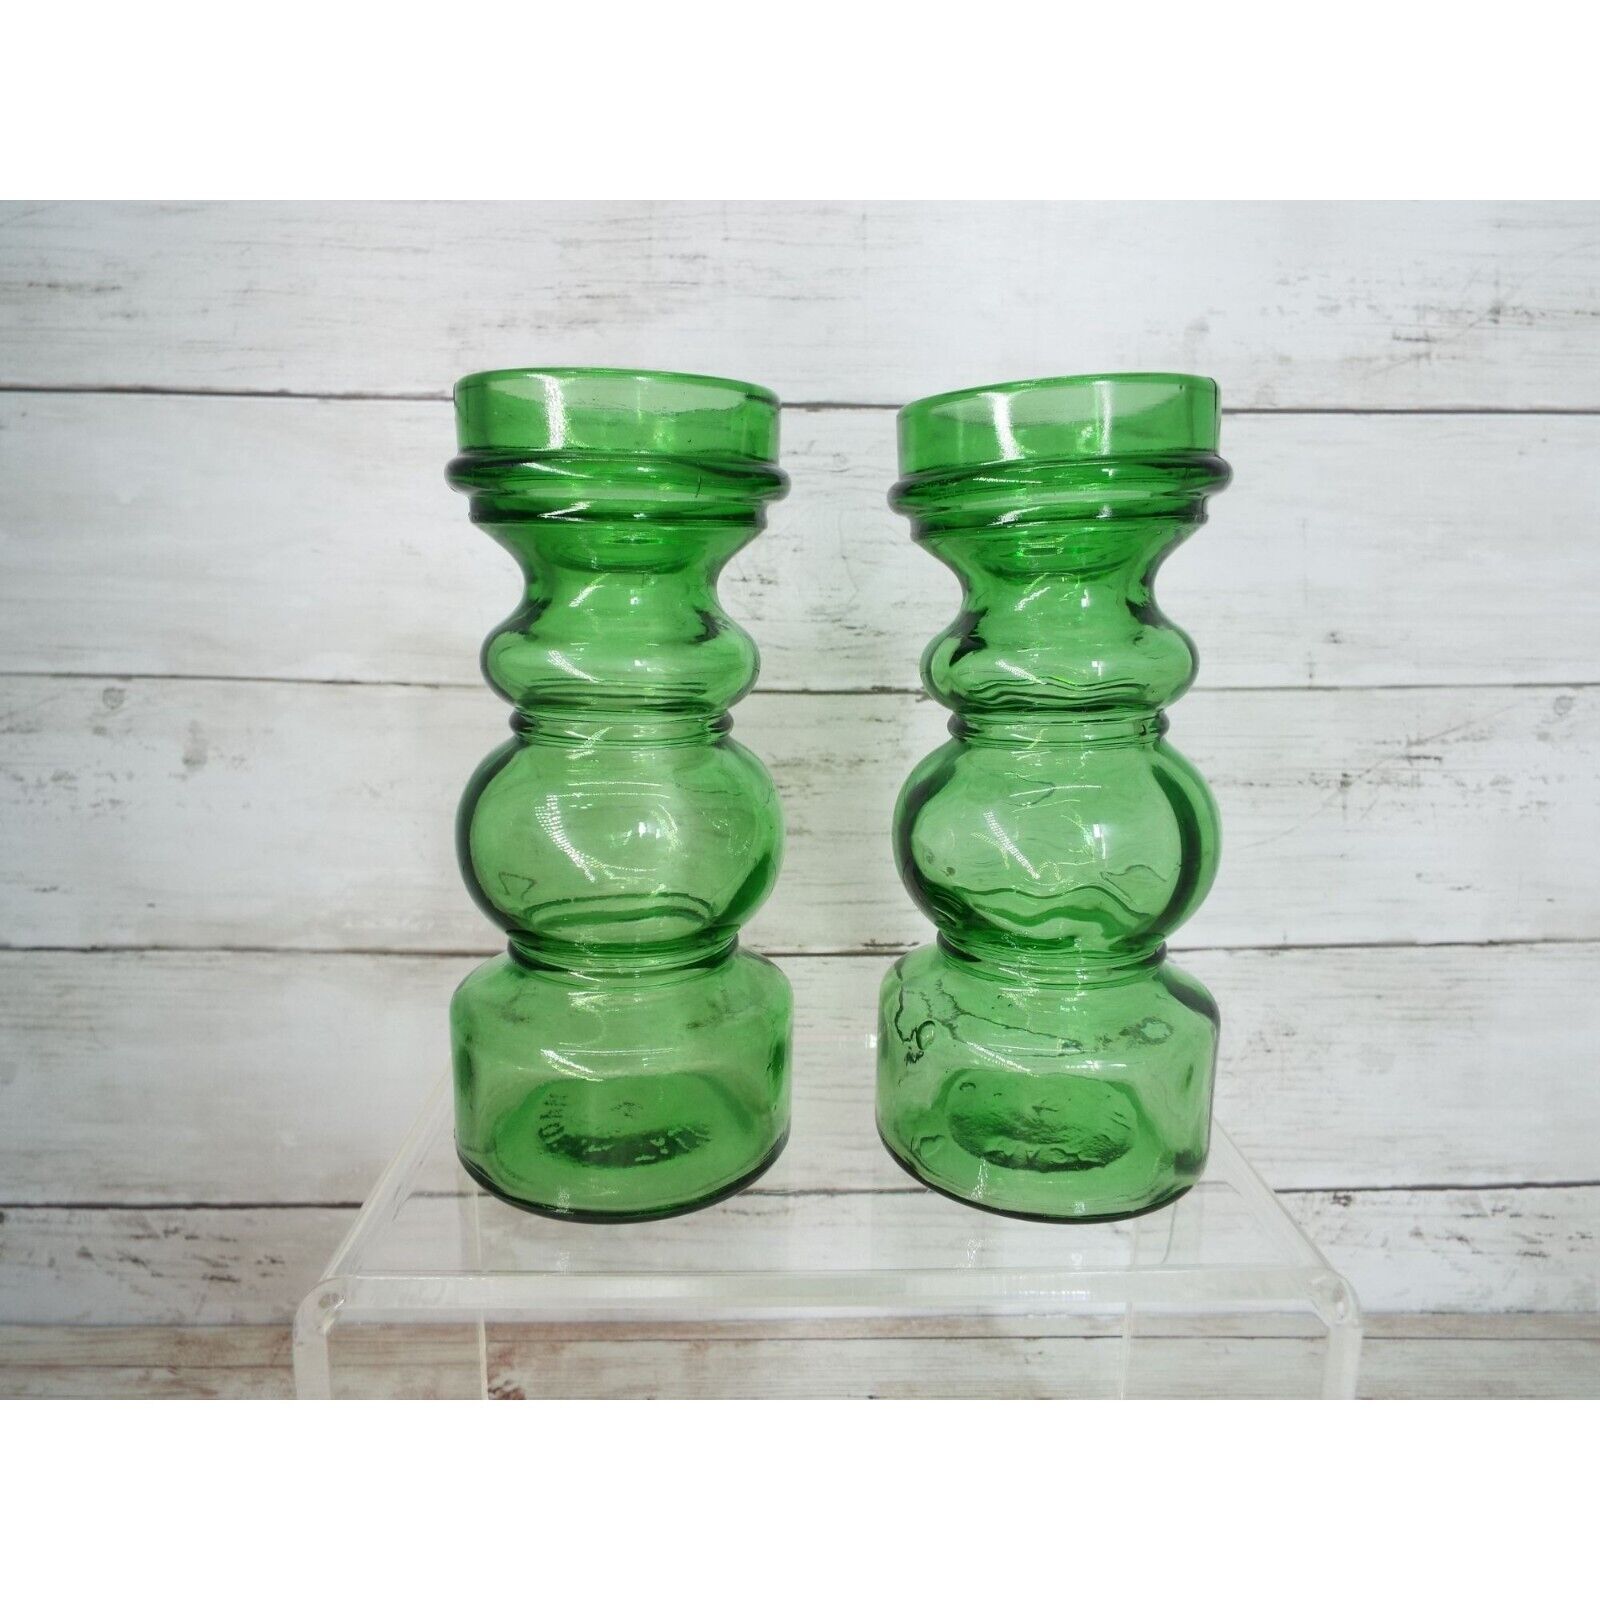 Vintage Pair of Vetreria Etrusca VE Italy Green Glass Bubble Vase Candle Holders